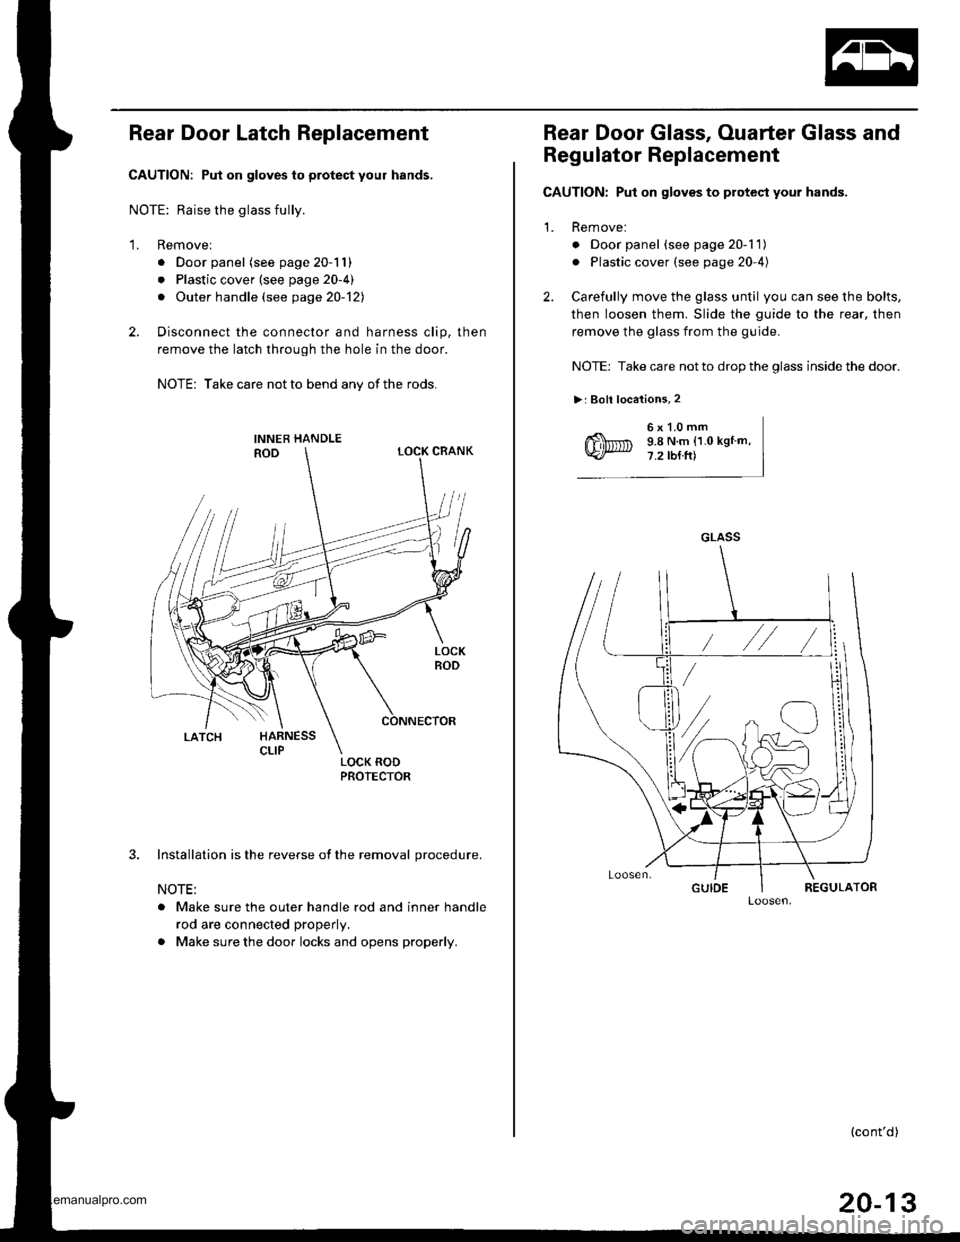 HONDA CR-V 2000 RD1-RD3 / 1.G Workshop Manual 
Rear Door Latch Replacement
CAUTION: Put on gloves to protect your hands,
NOTE: Raise the glass fully.
1. Removel
. Door panel (see page 20-11)
. Plastic cover (see page 20-4)
. Outer handle (see pag